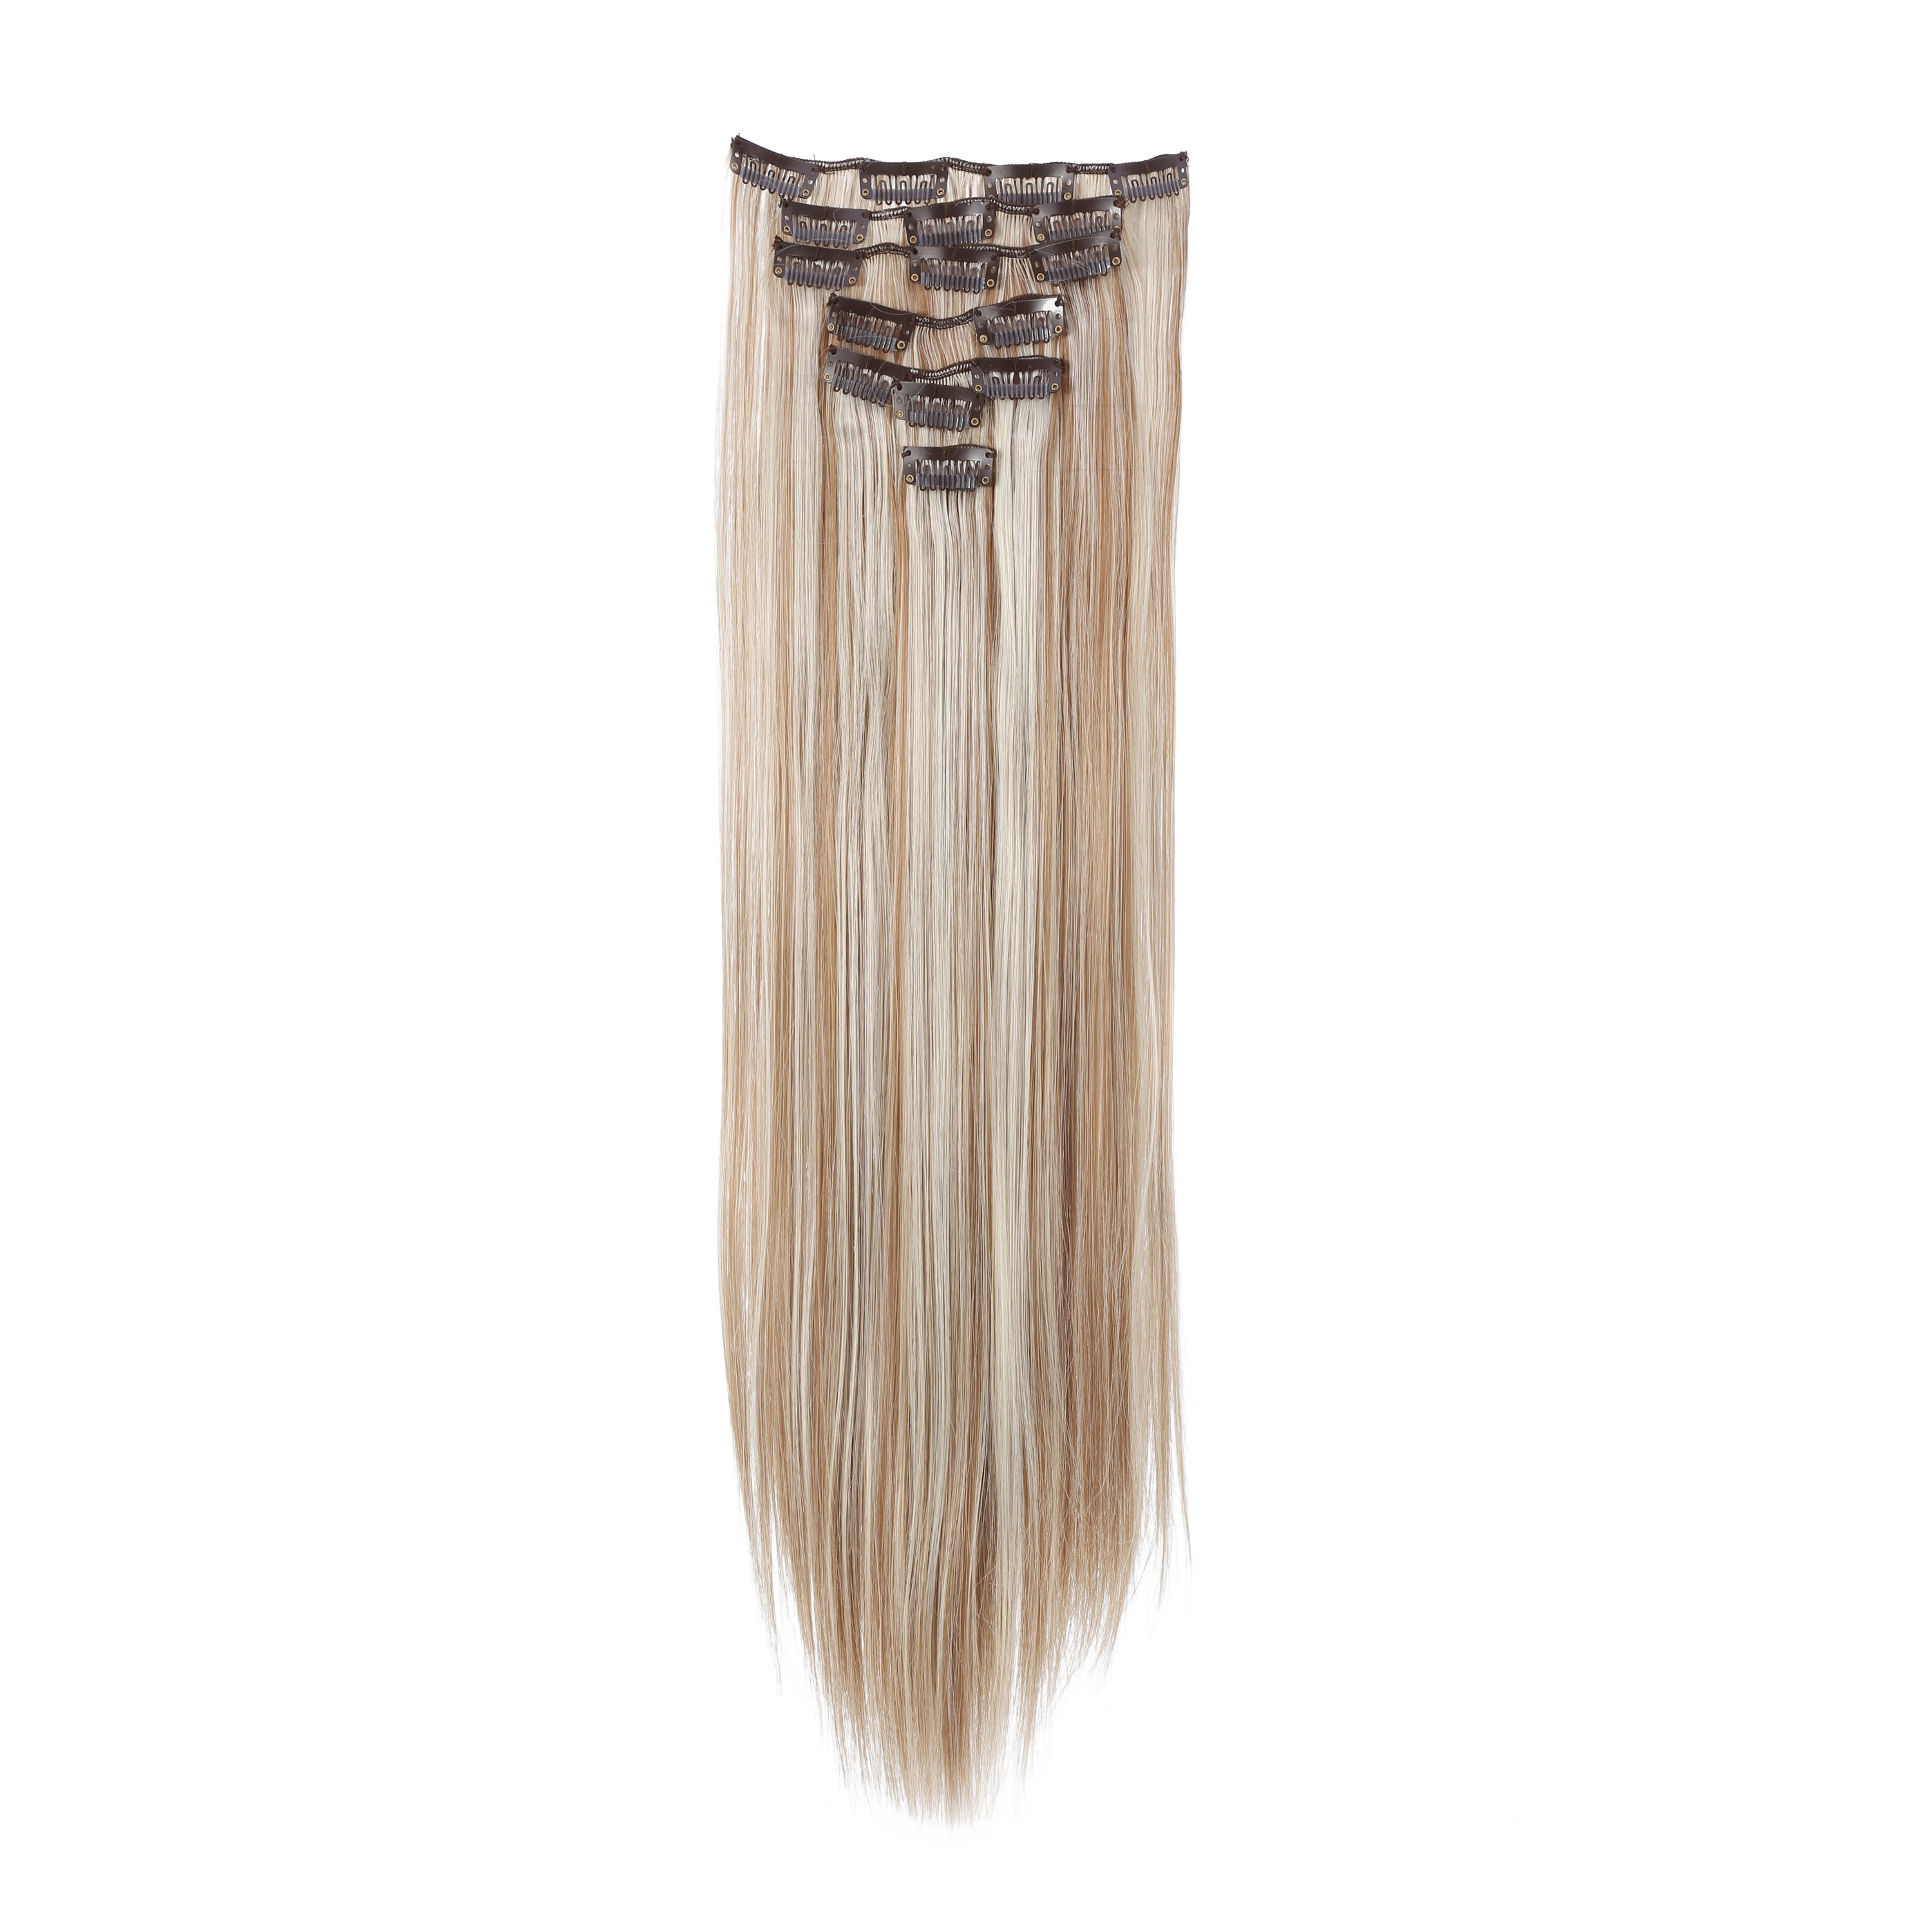 Long Straight Synthetic One Piece Clip In Hair Extensions 20 Inches